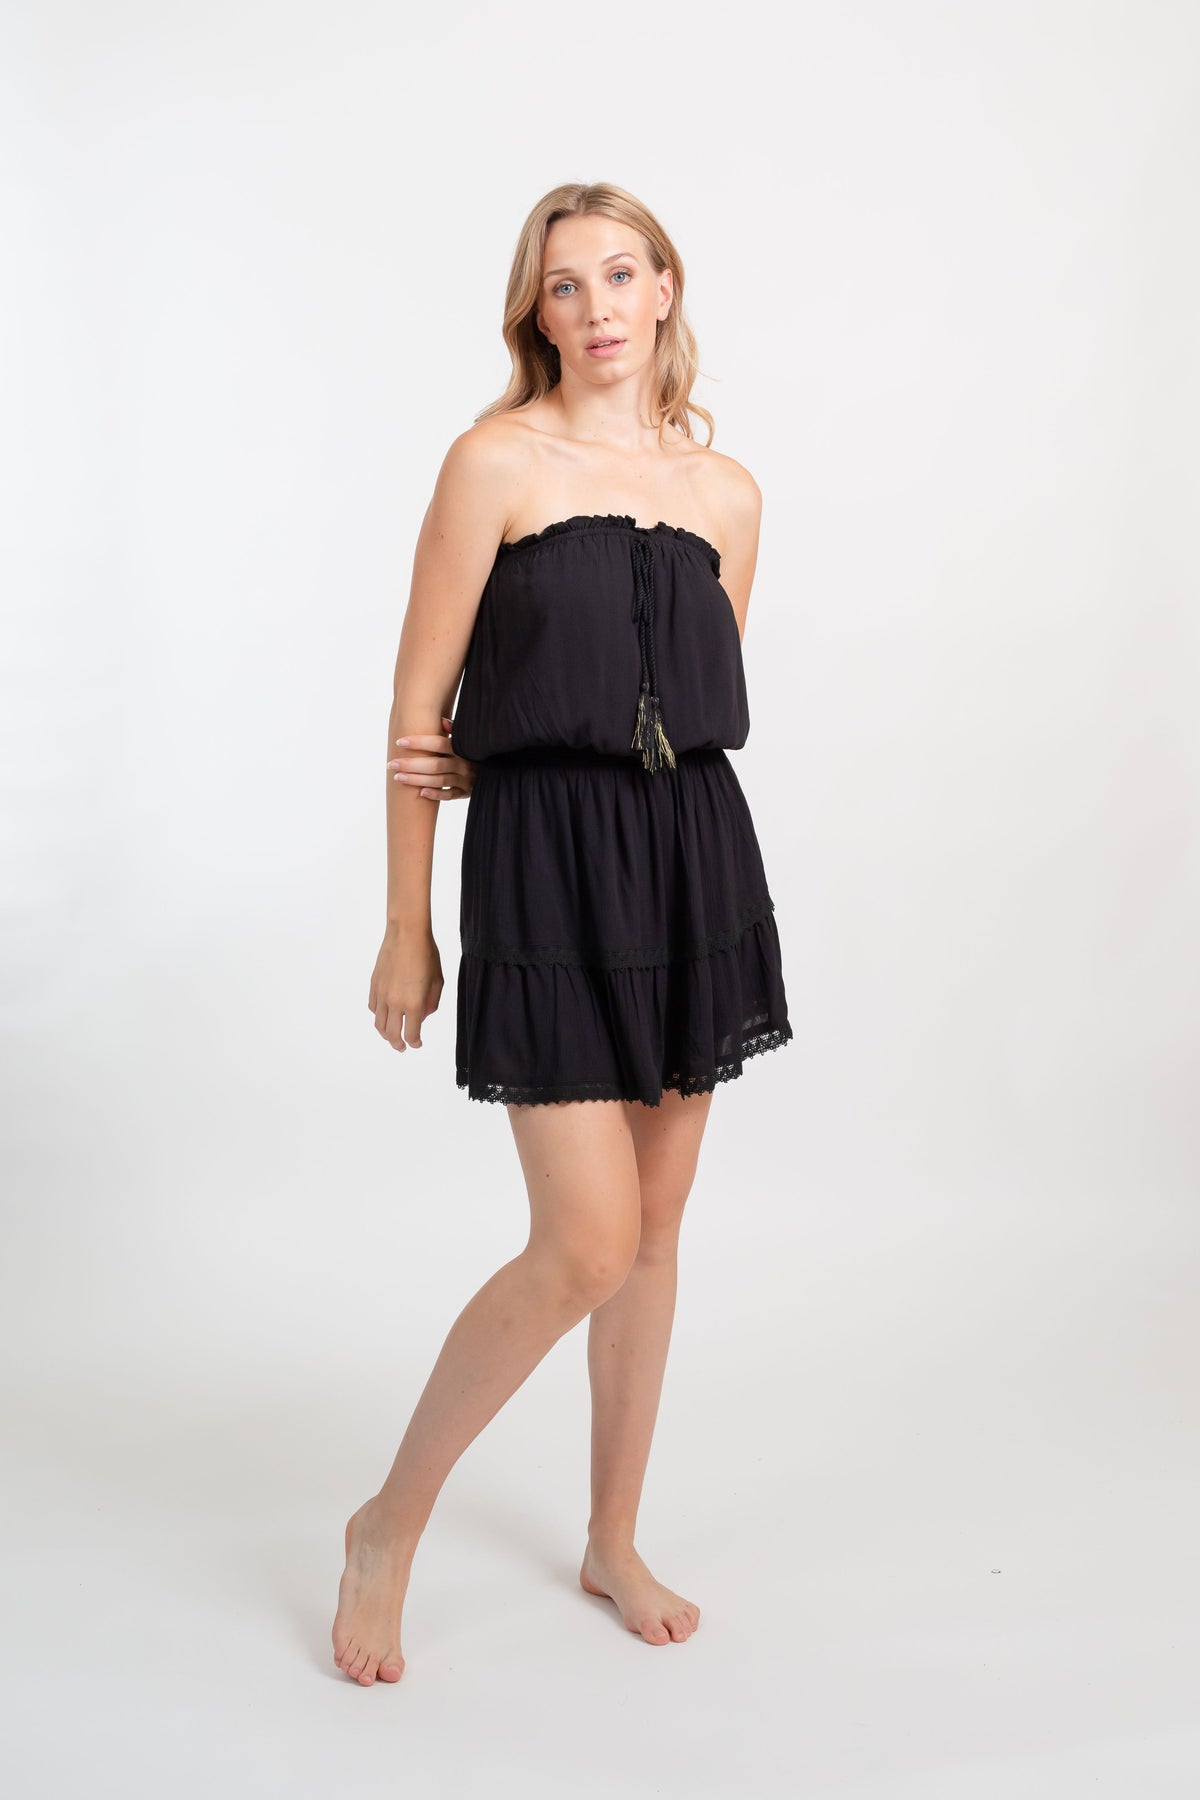 A blonde Caucasian model wearing a black color bandeau  mini boho dress, standing in a studio with her arms behind her back looking at the camera posing.